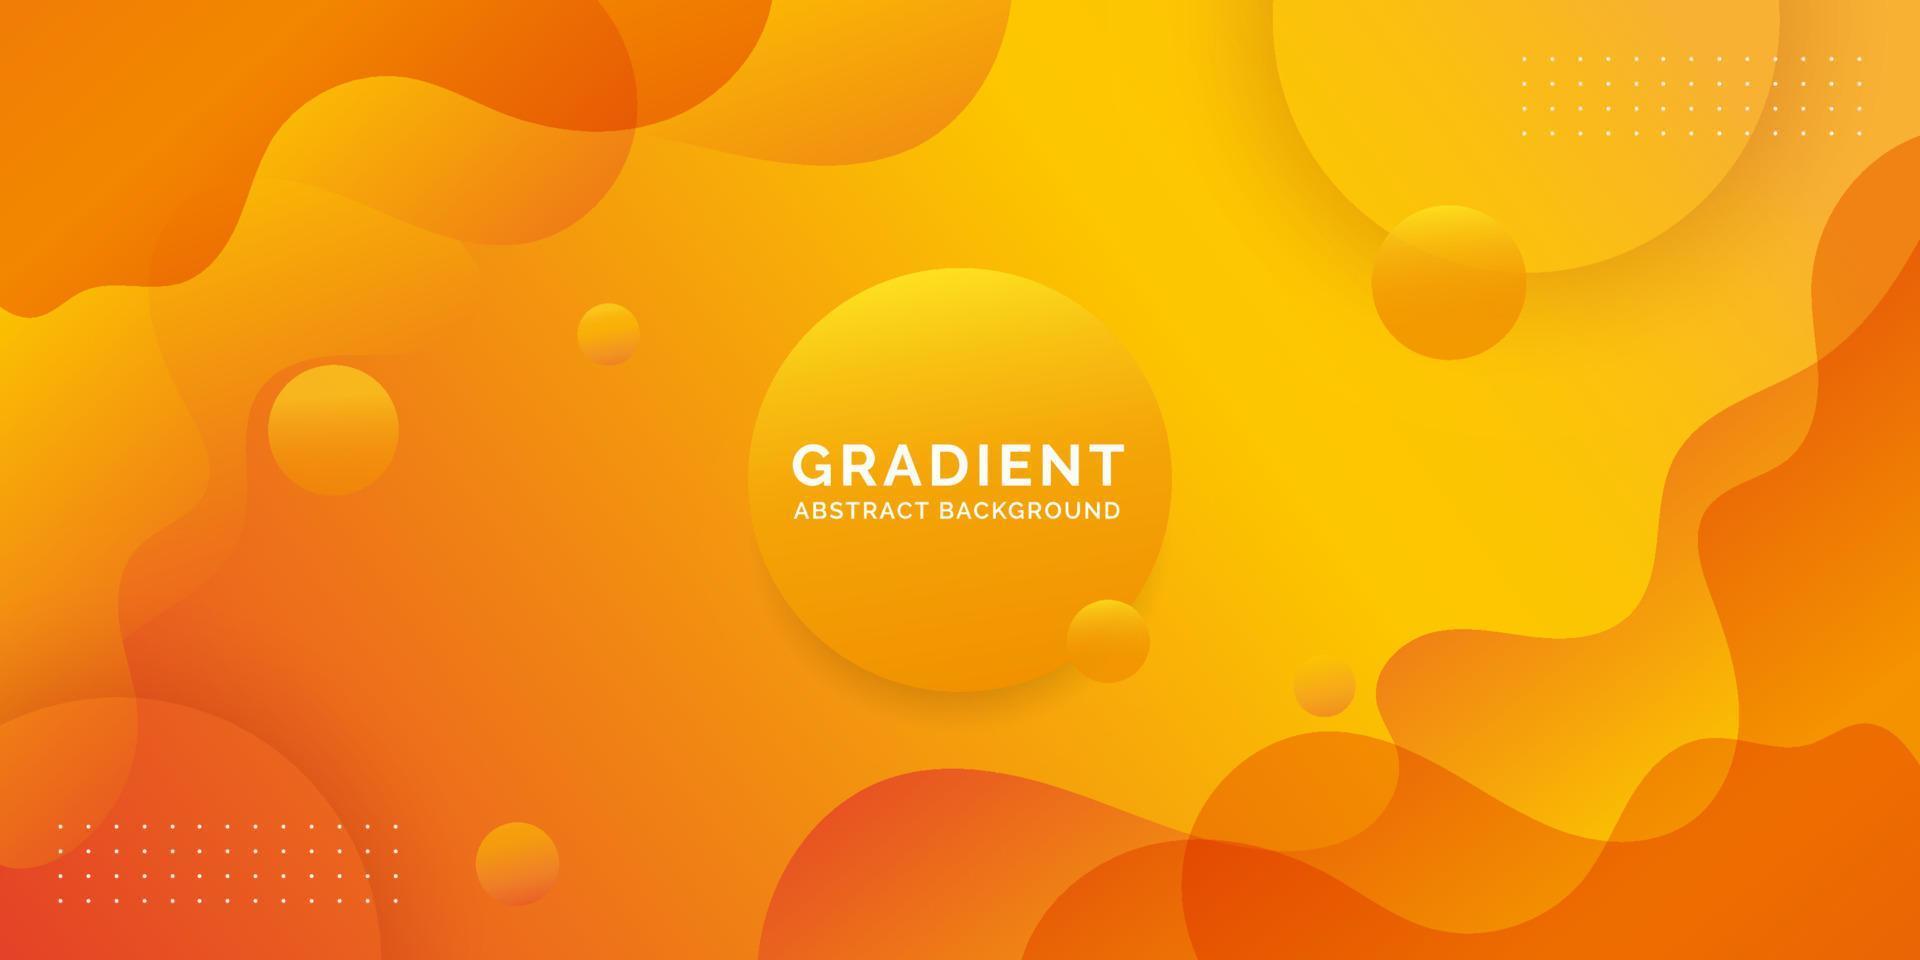 Gradient Abstract Background, Orange Abstract Backgrounds vector